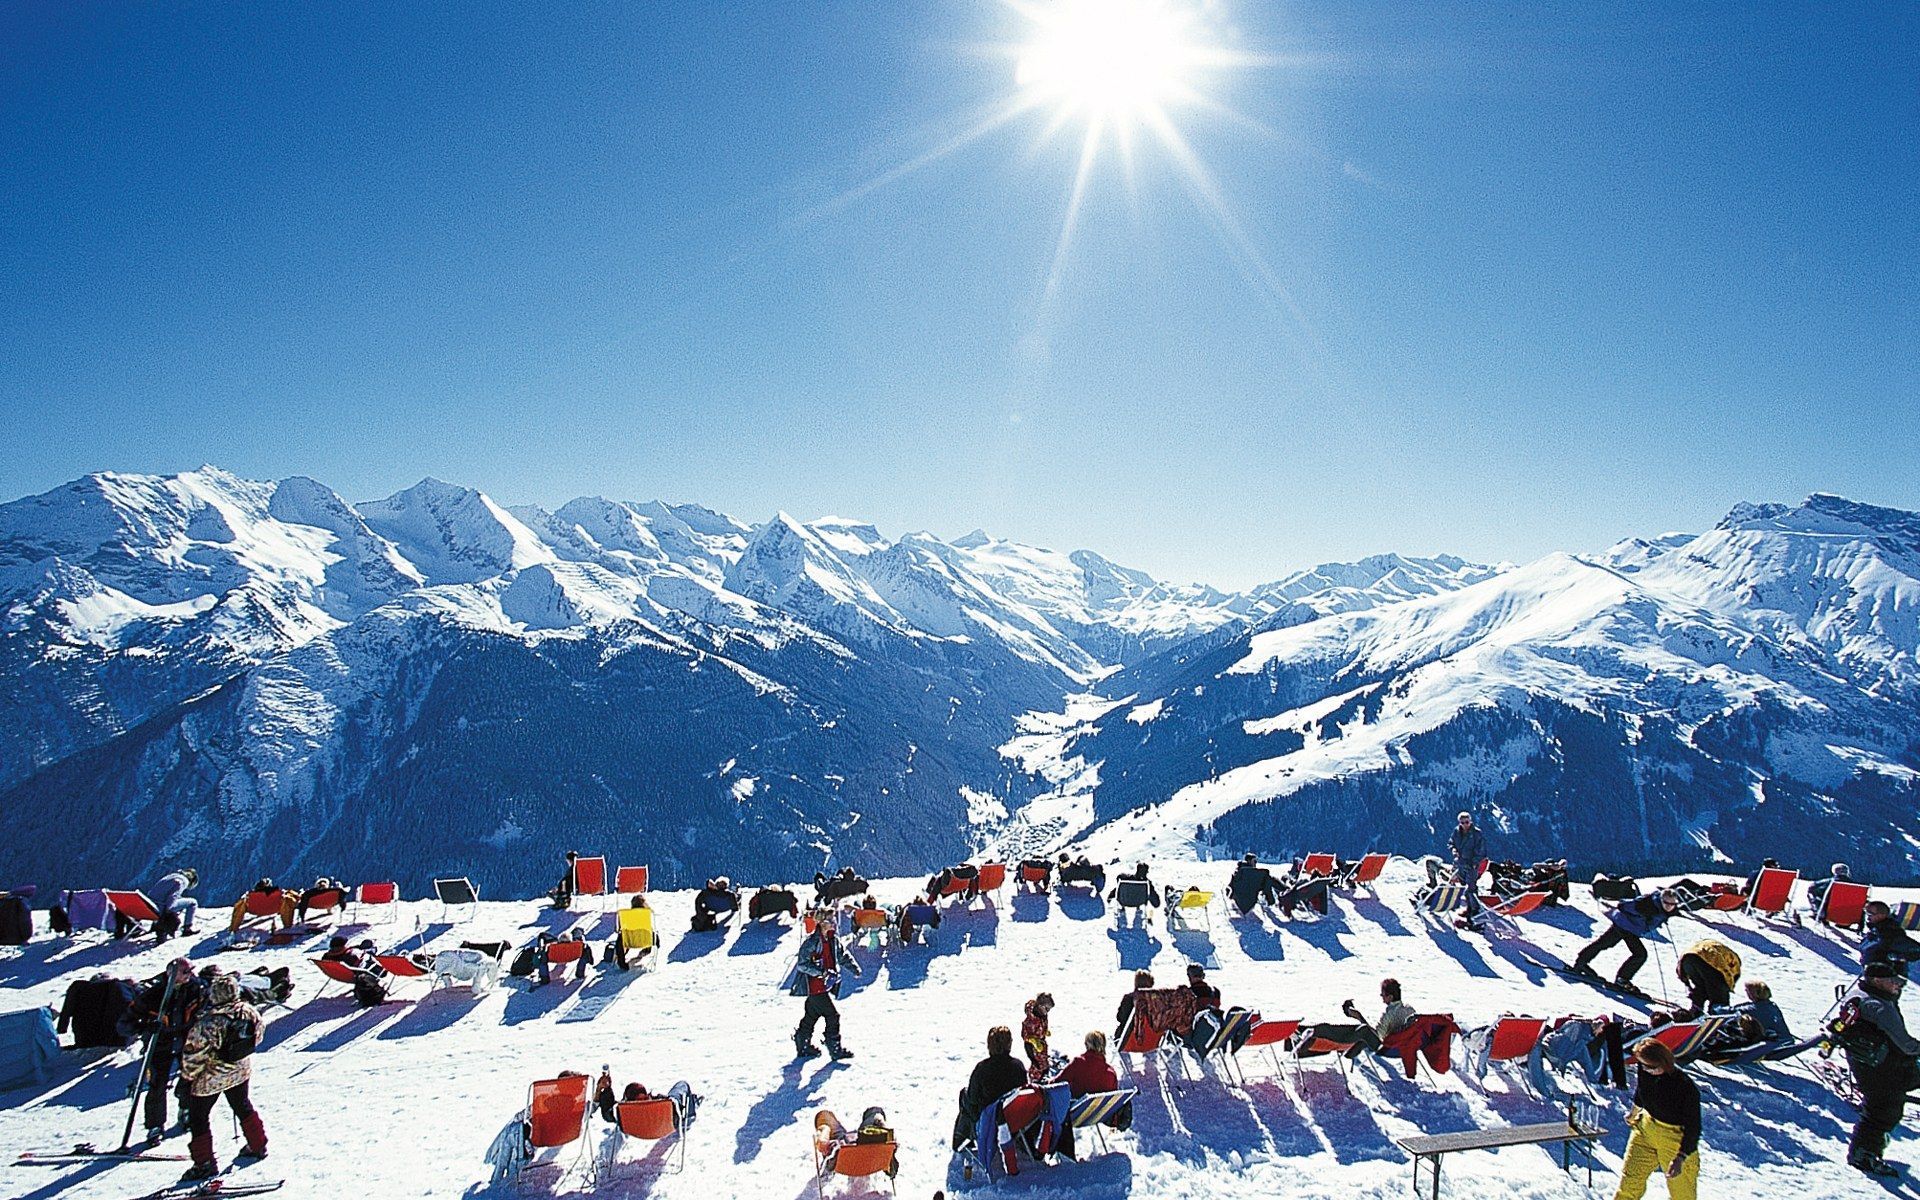 Winter Fun in the Alps - Alps Ski Vacation Wallpapers 1920x1200 NO ...